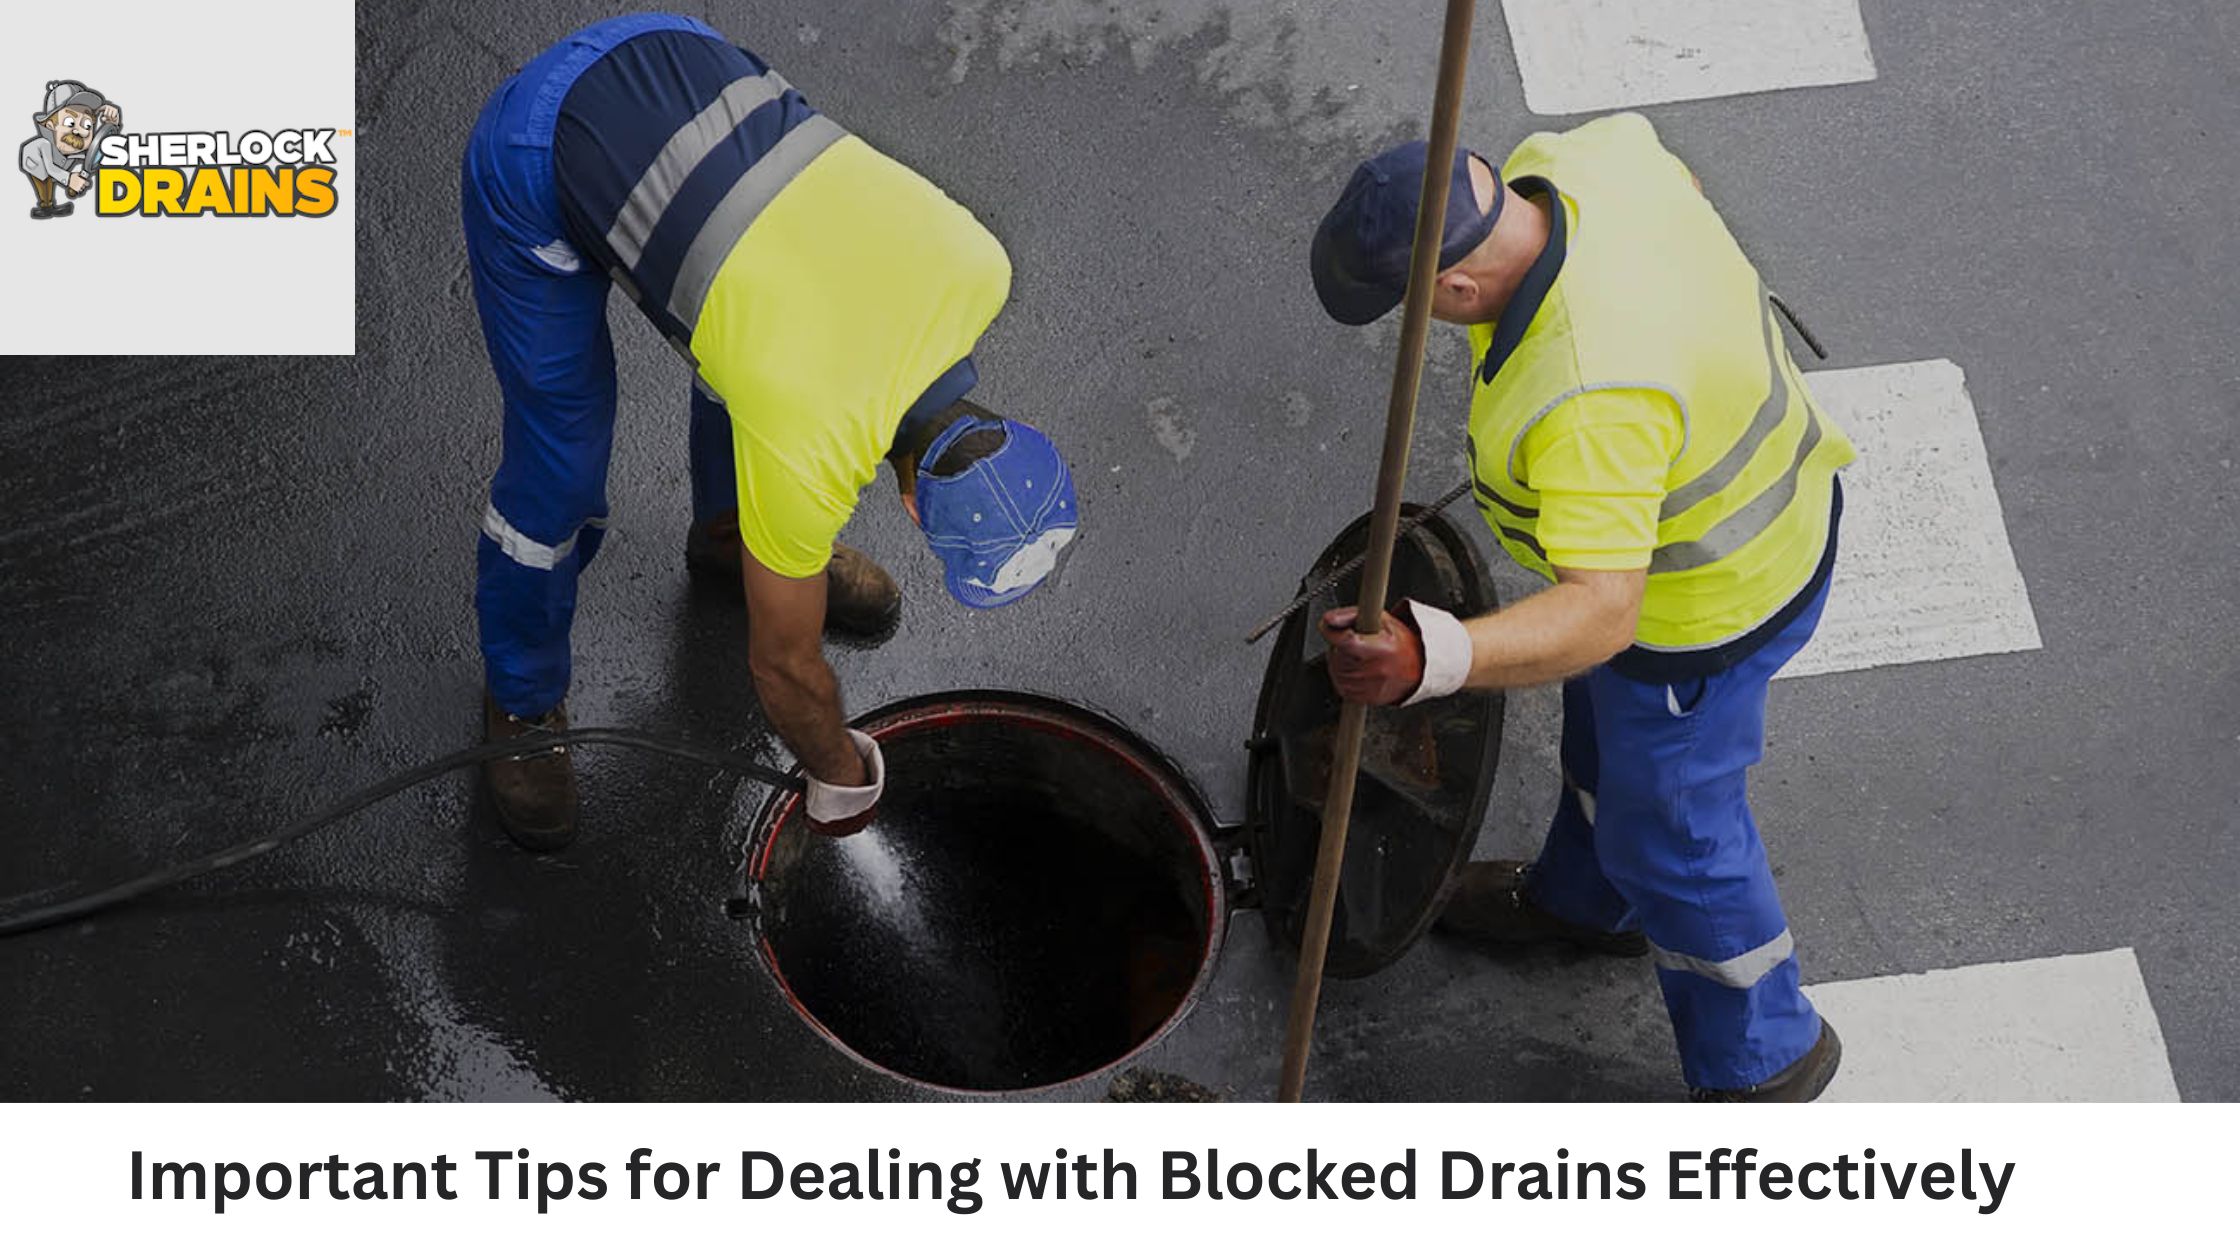 Important Tips for Dealing with Blocked Drains Effectively